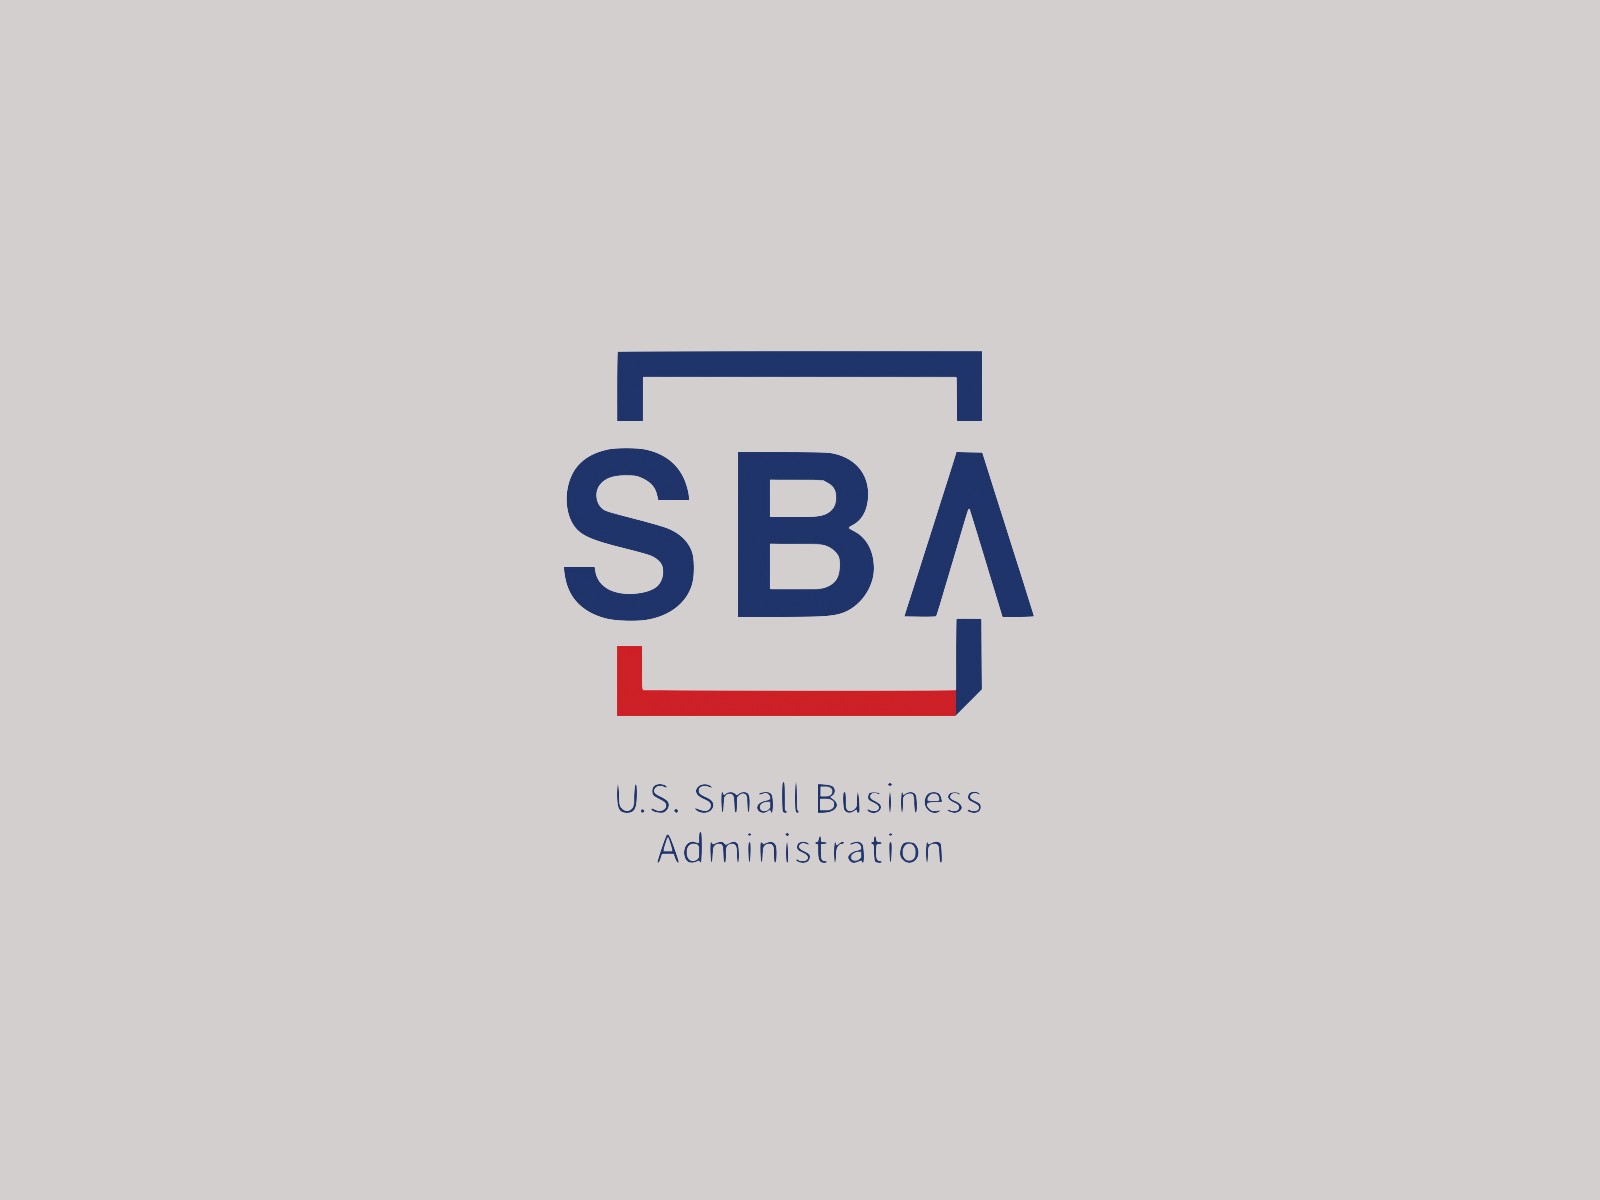 SBA Features Zane Networks In Their SBA Success Story Series